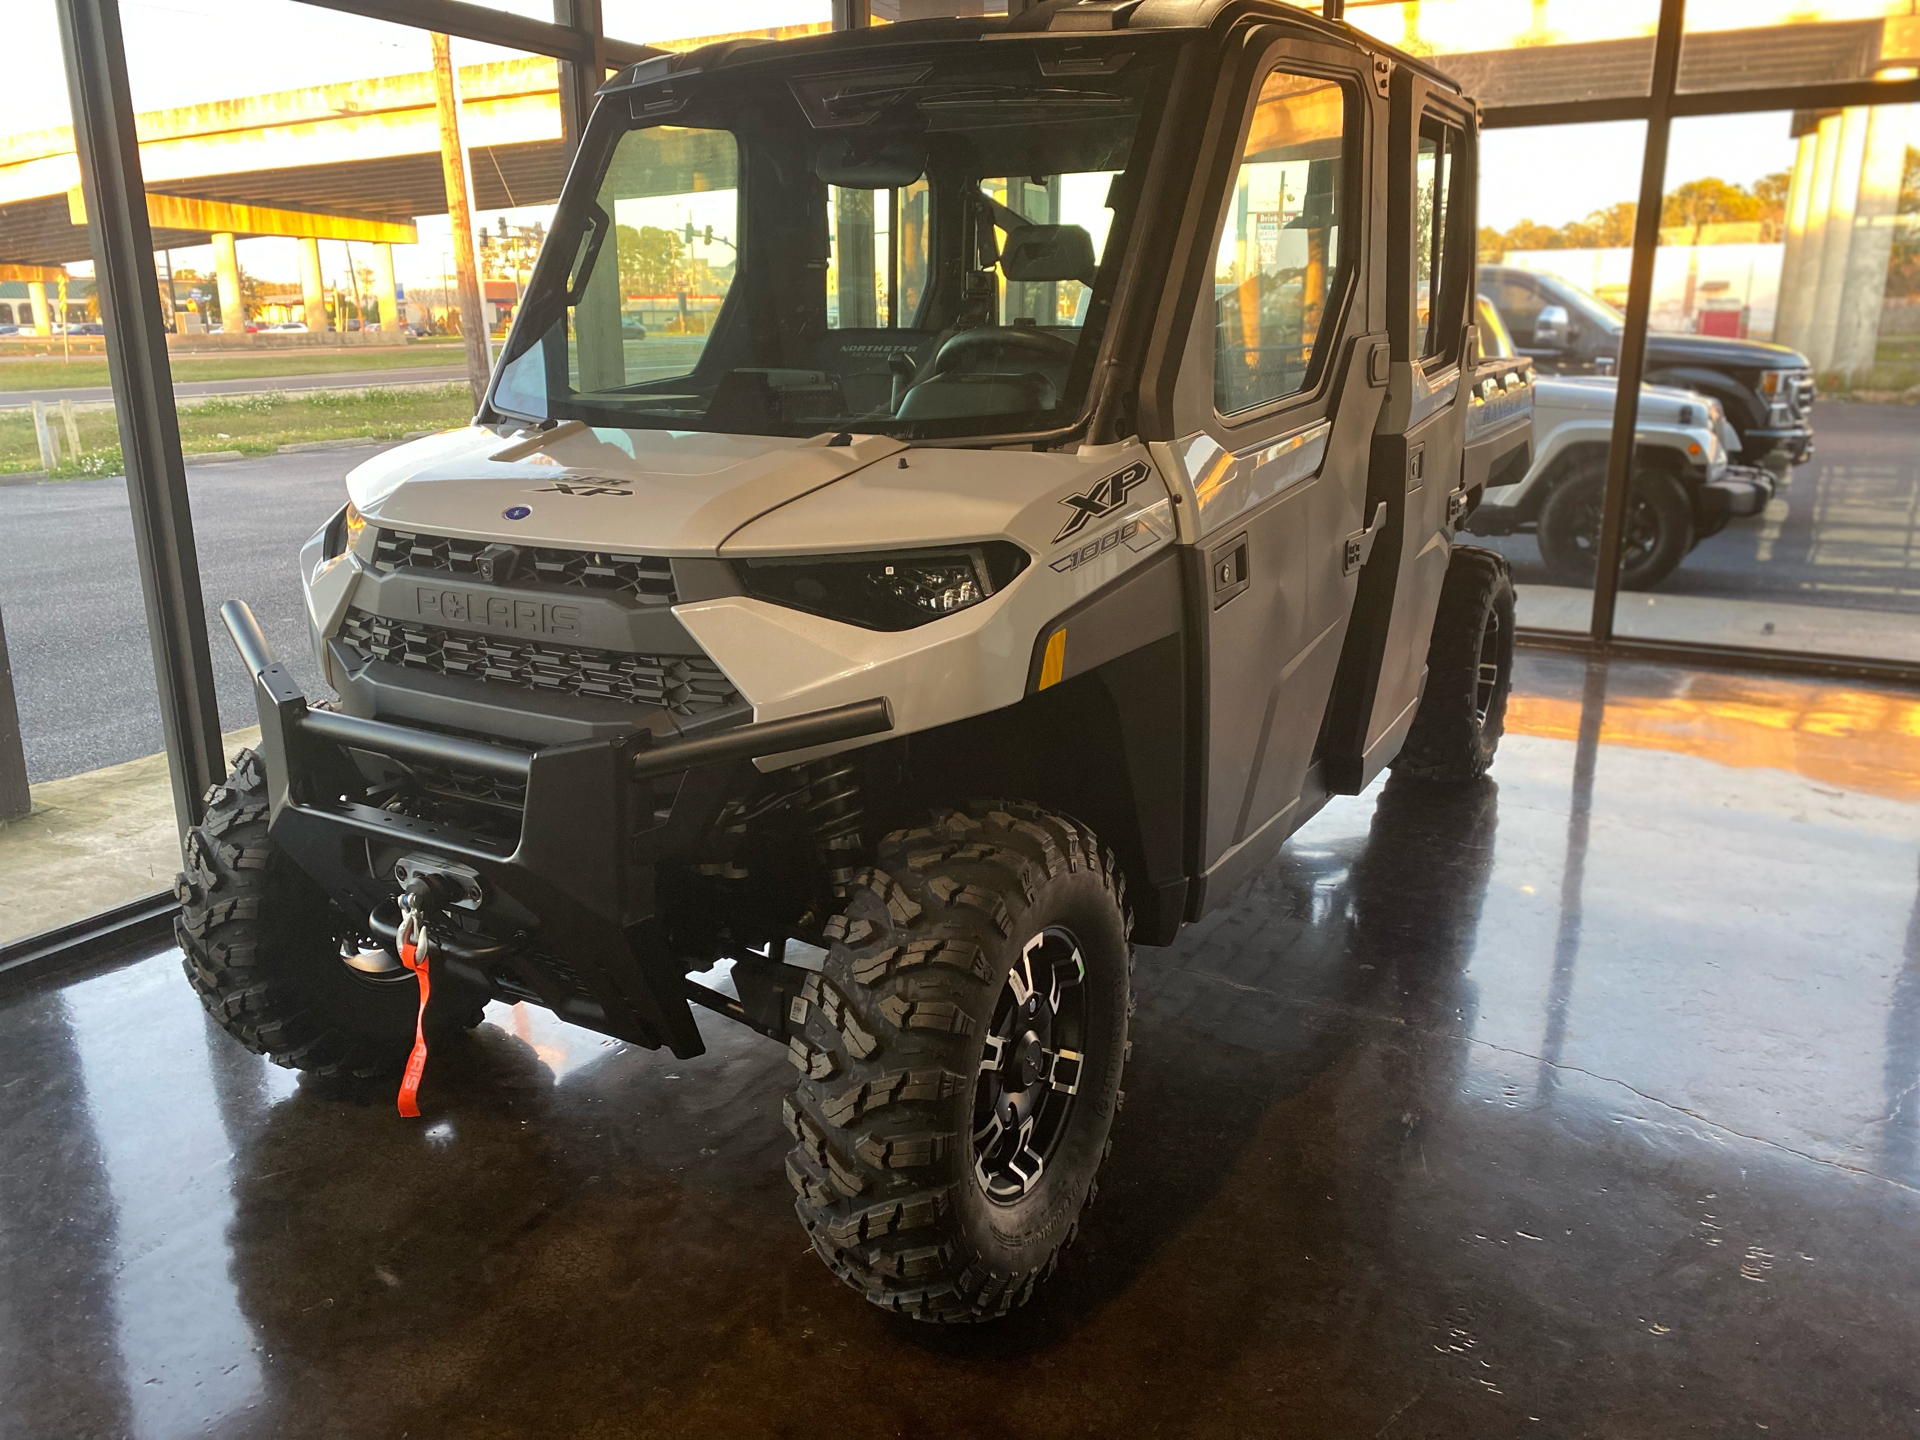 2022 Polaris Ranger Crew XP 1000 NorthStar Edition Ultimate in Pascagoula, Mississippi - Photo 1